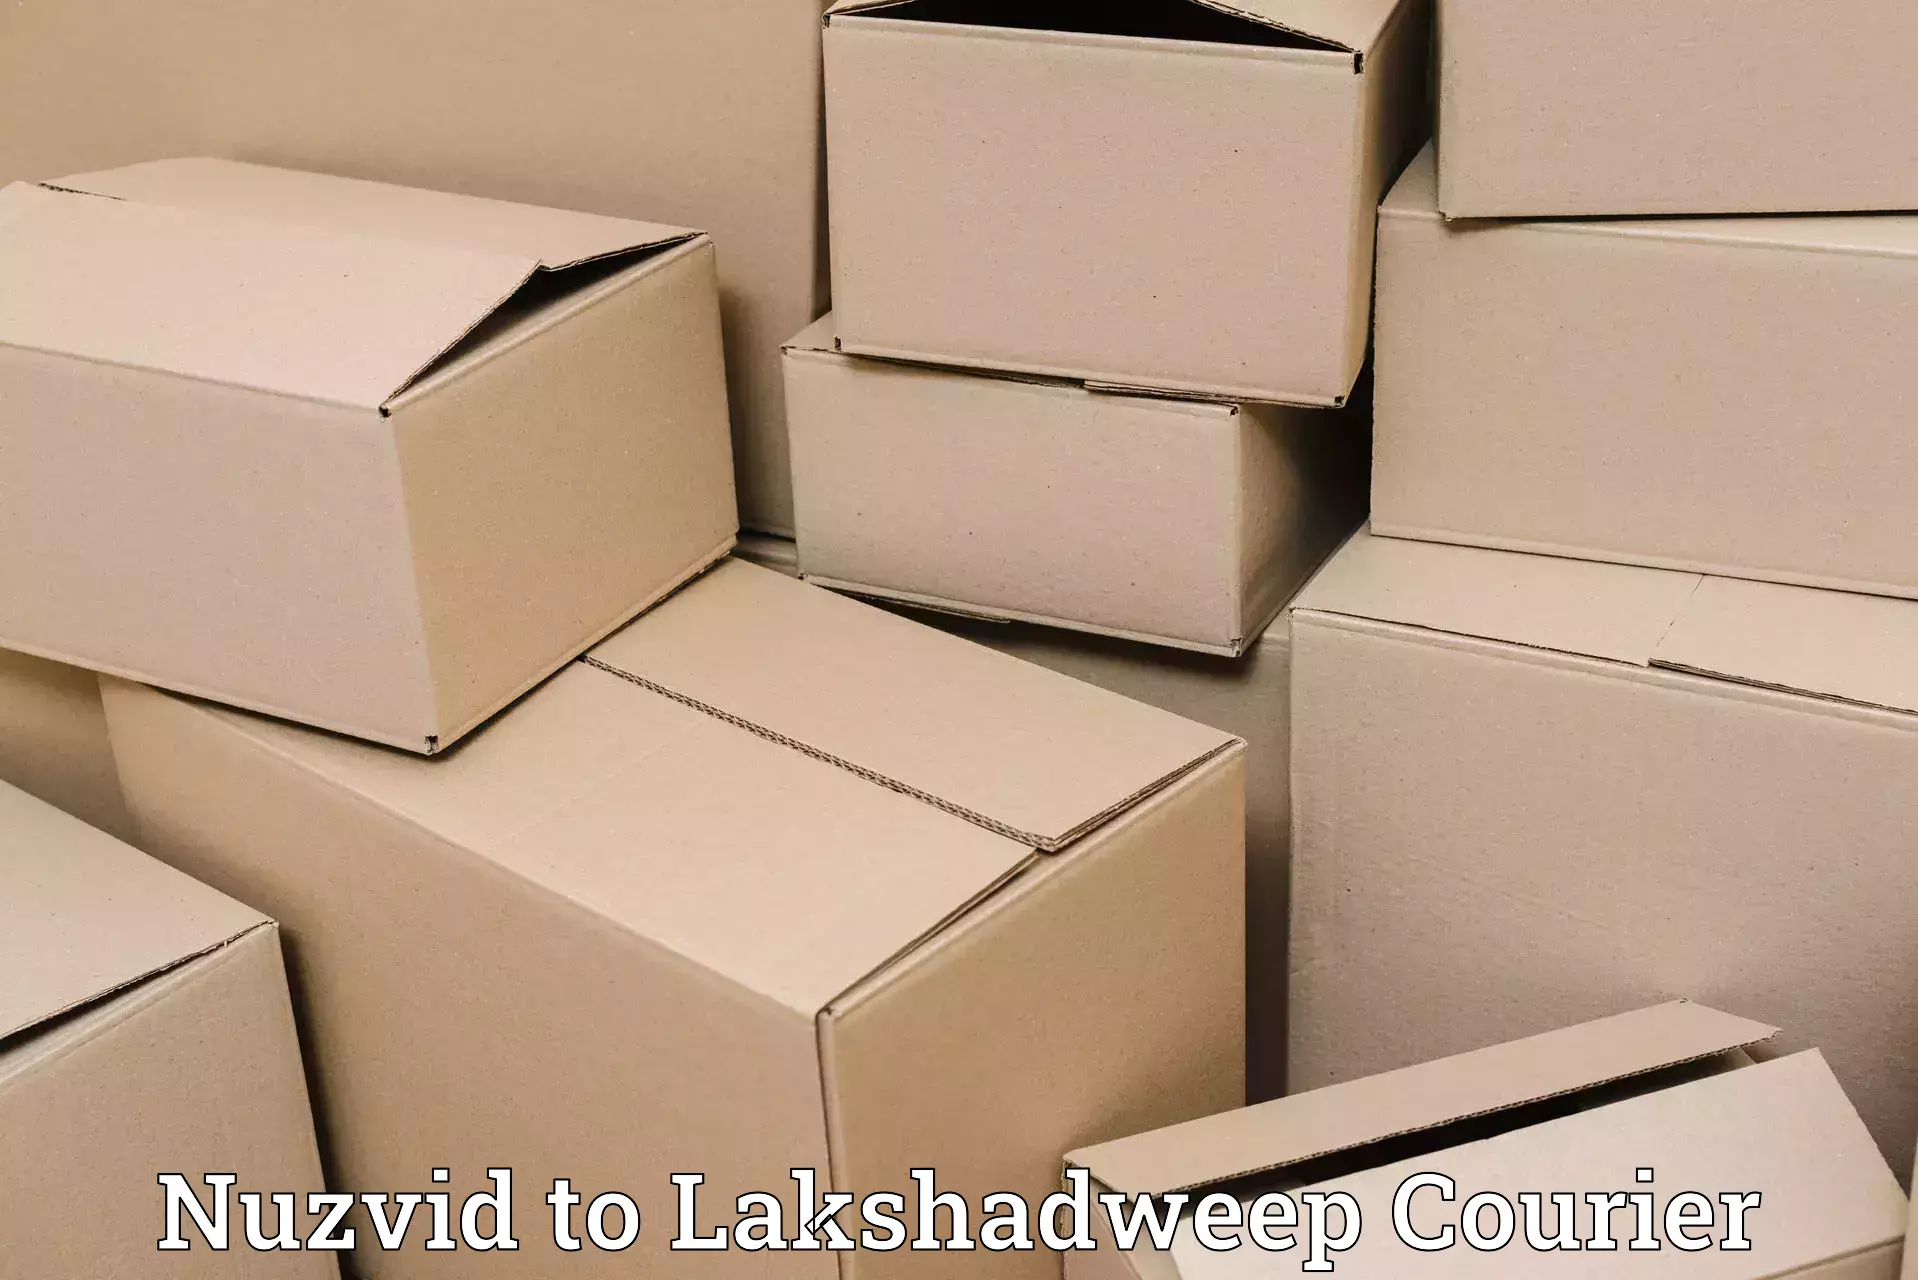 Next-day delivery options Nuzvid to Lakshadweep